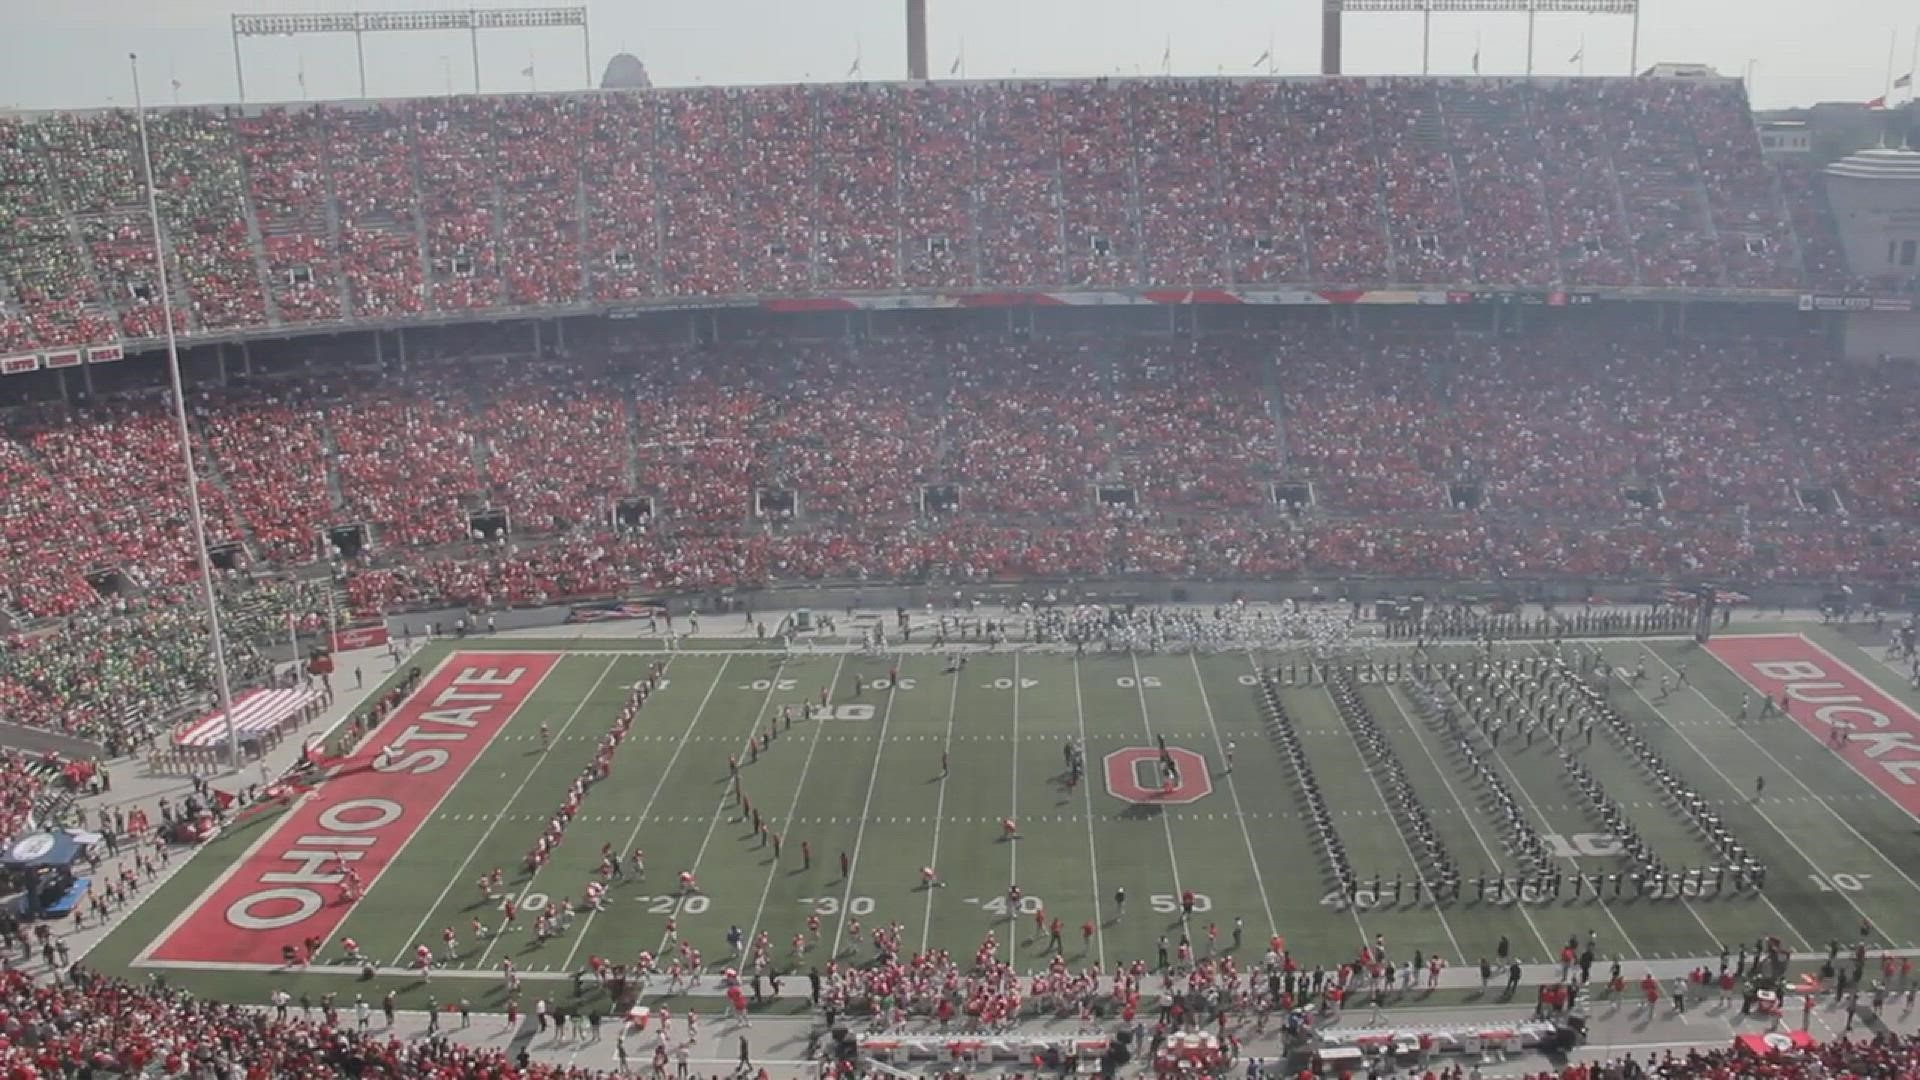 Prior to the national anthem, a moment of silence was held at Ohio Stadium Saturday before the Buckeyes' home opener against Oregon.